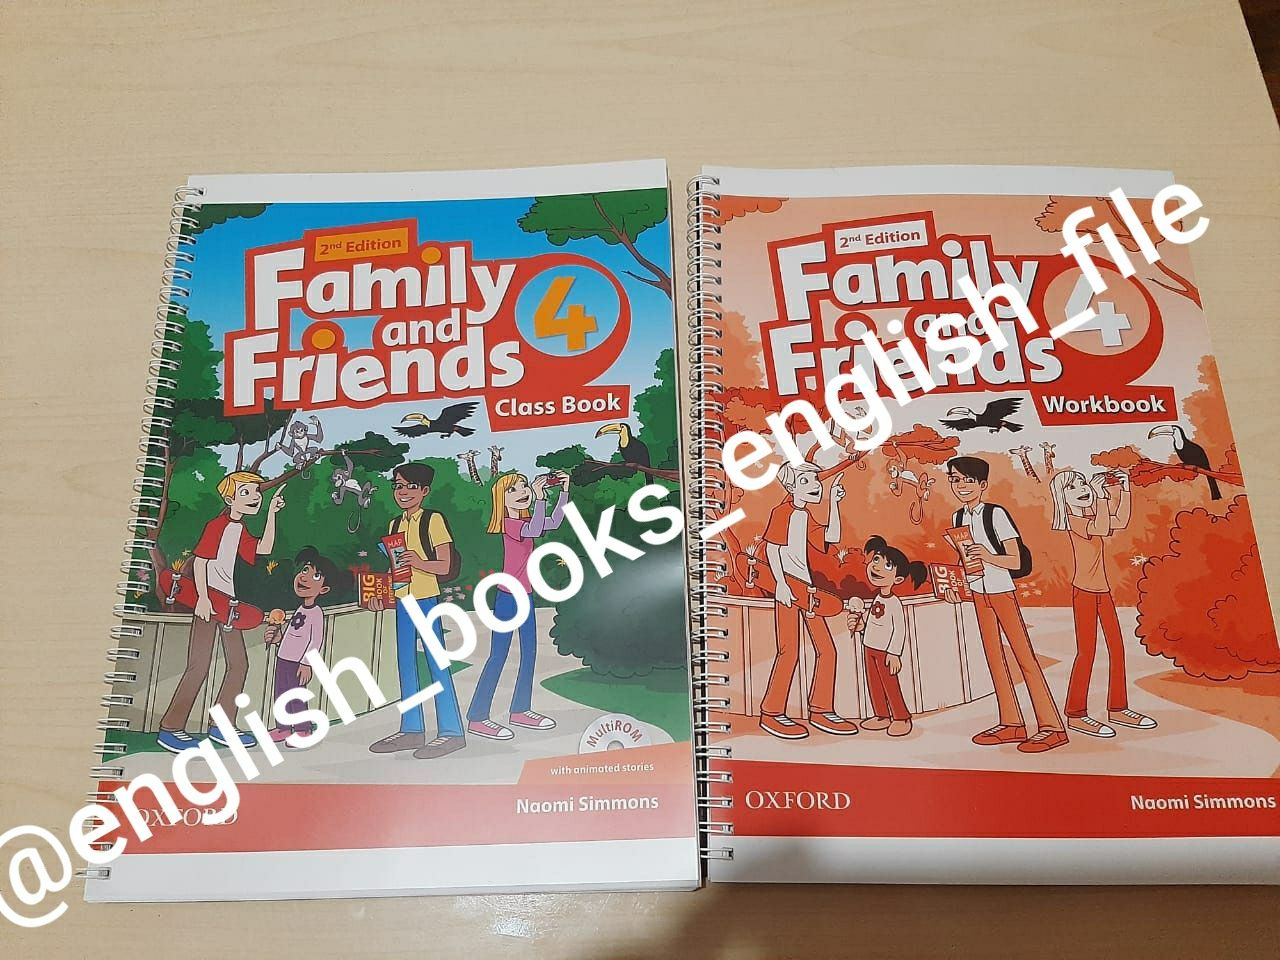 English file. Family and friends. Headway. Solutions. Английский книги